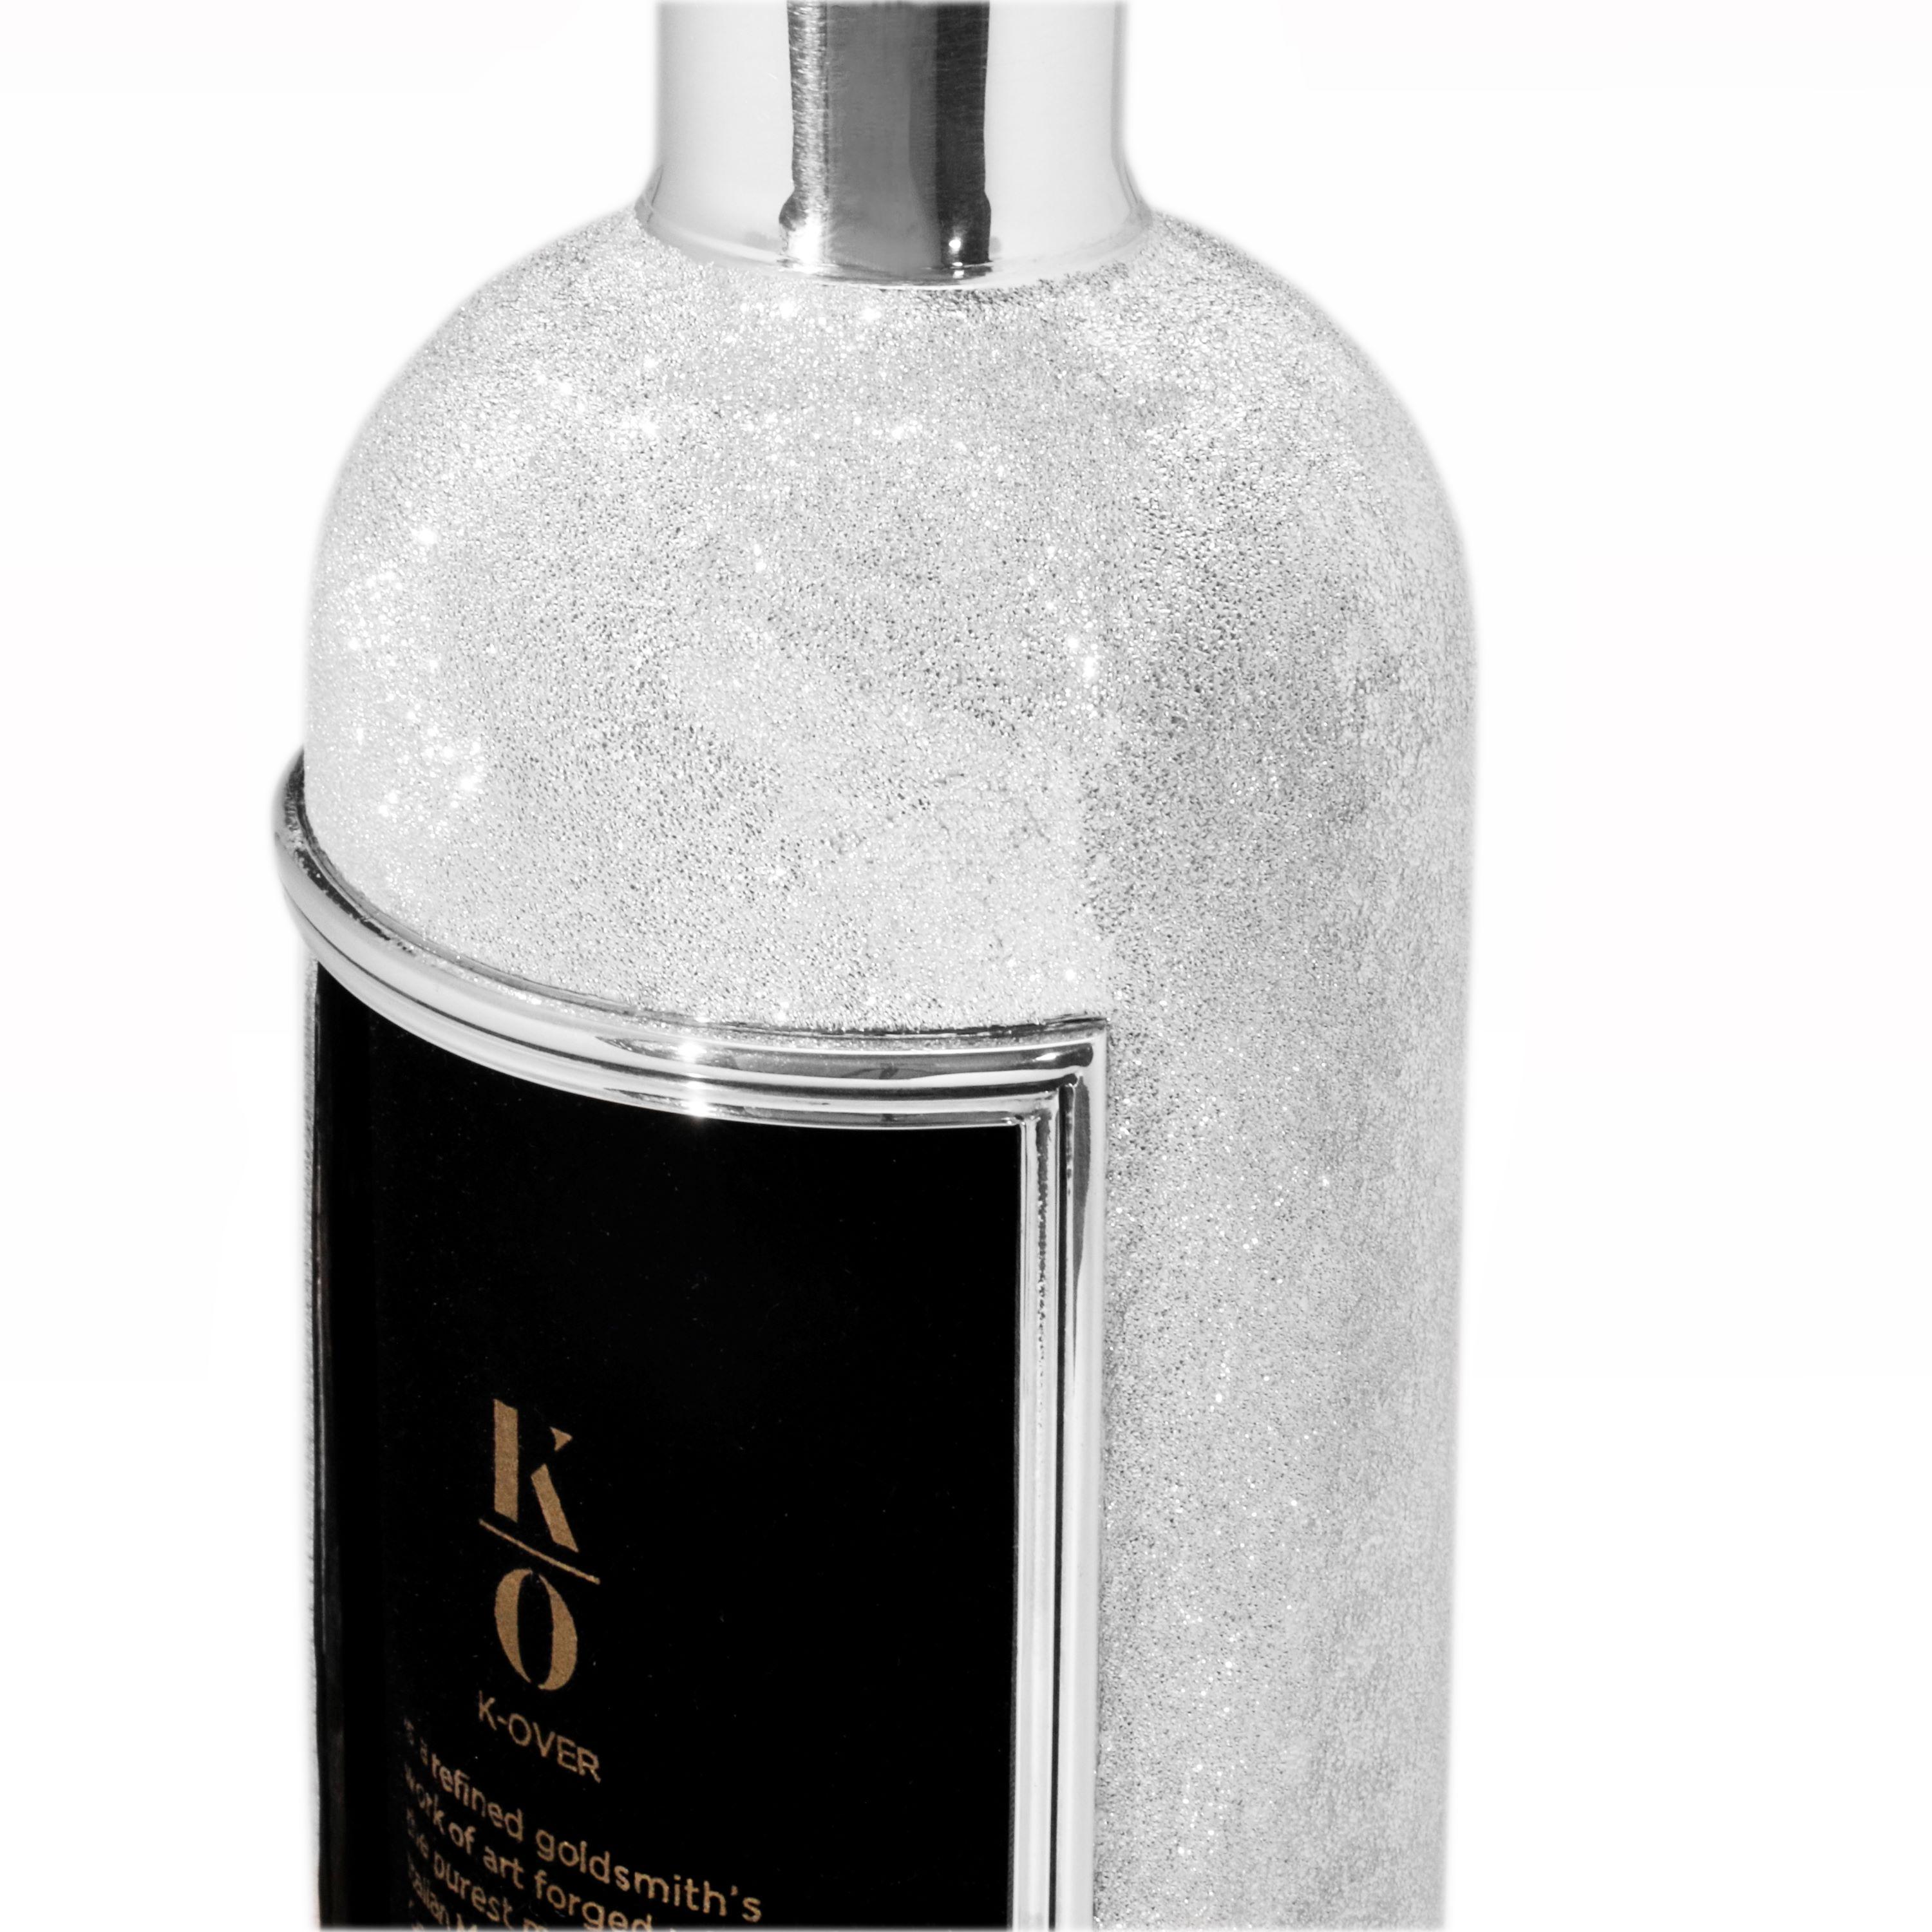 Usually used for your special wine bottles, this K-OVER allows you to show the labels of your favorite wines.

As it can be clearly seen from the pictures, the surface of the K-OVER shines as the moon. This innovative texture provides also a